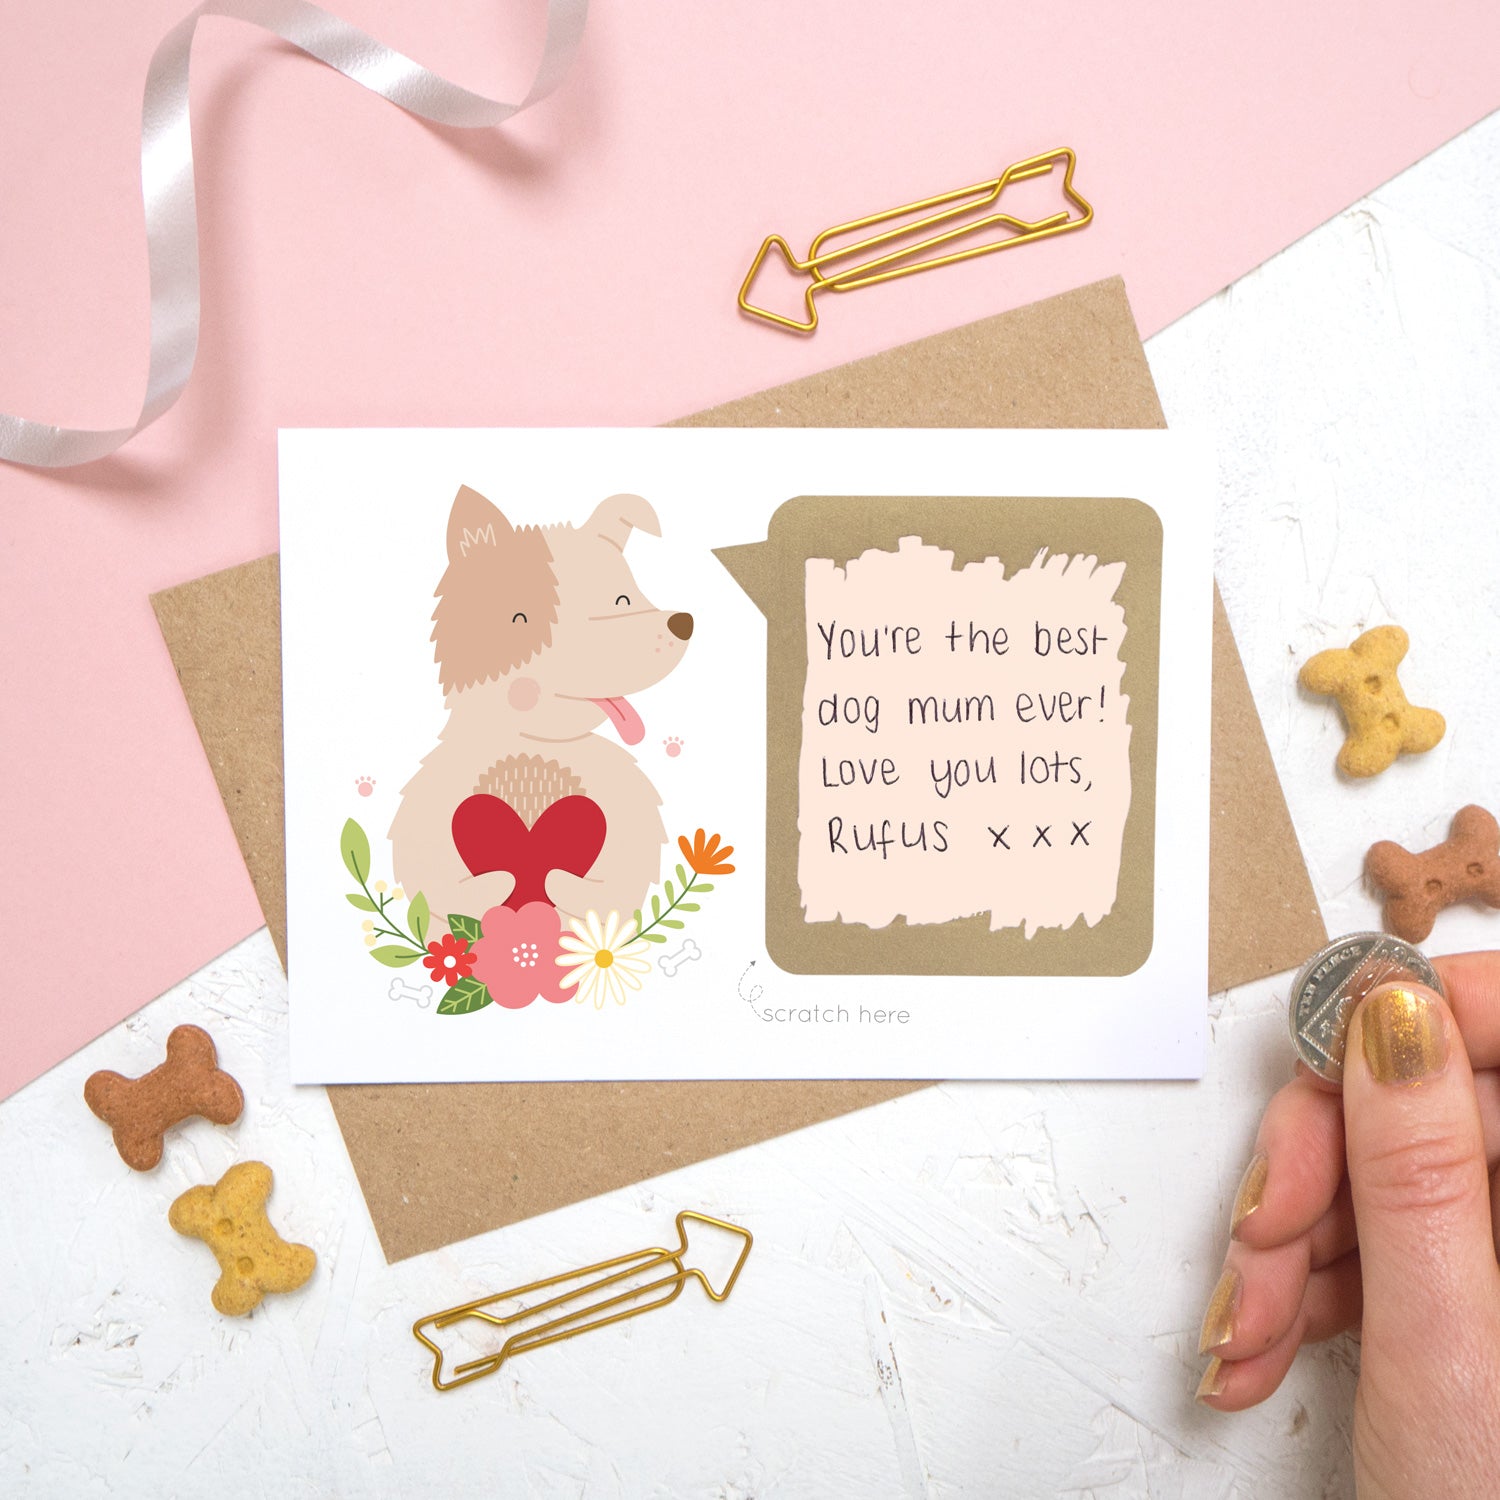 A personalised dog scratch card with a hand written message that has been scratched off. Photographed on a pink and white background with dog biscuits for props.